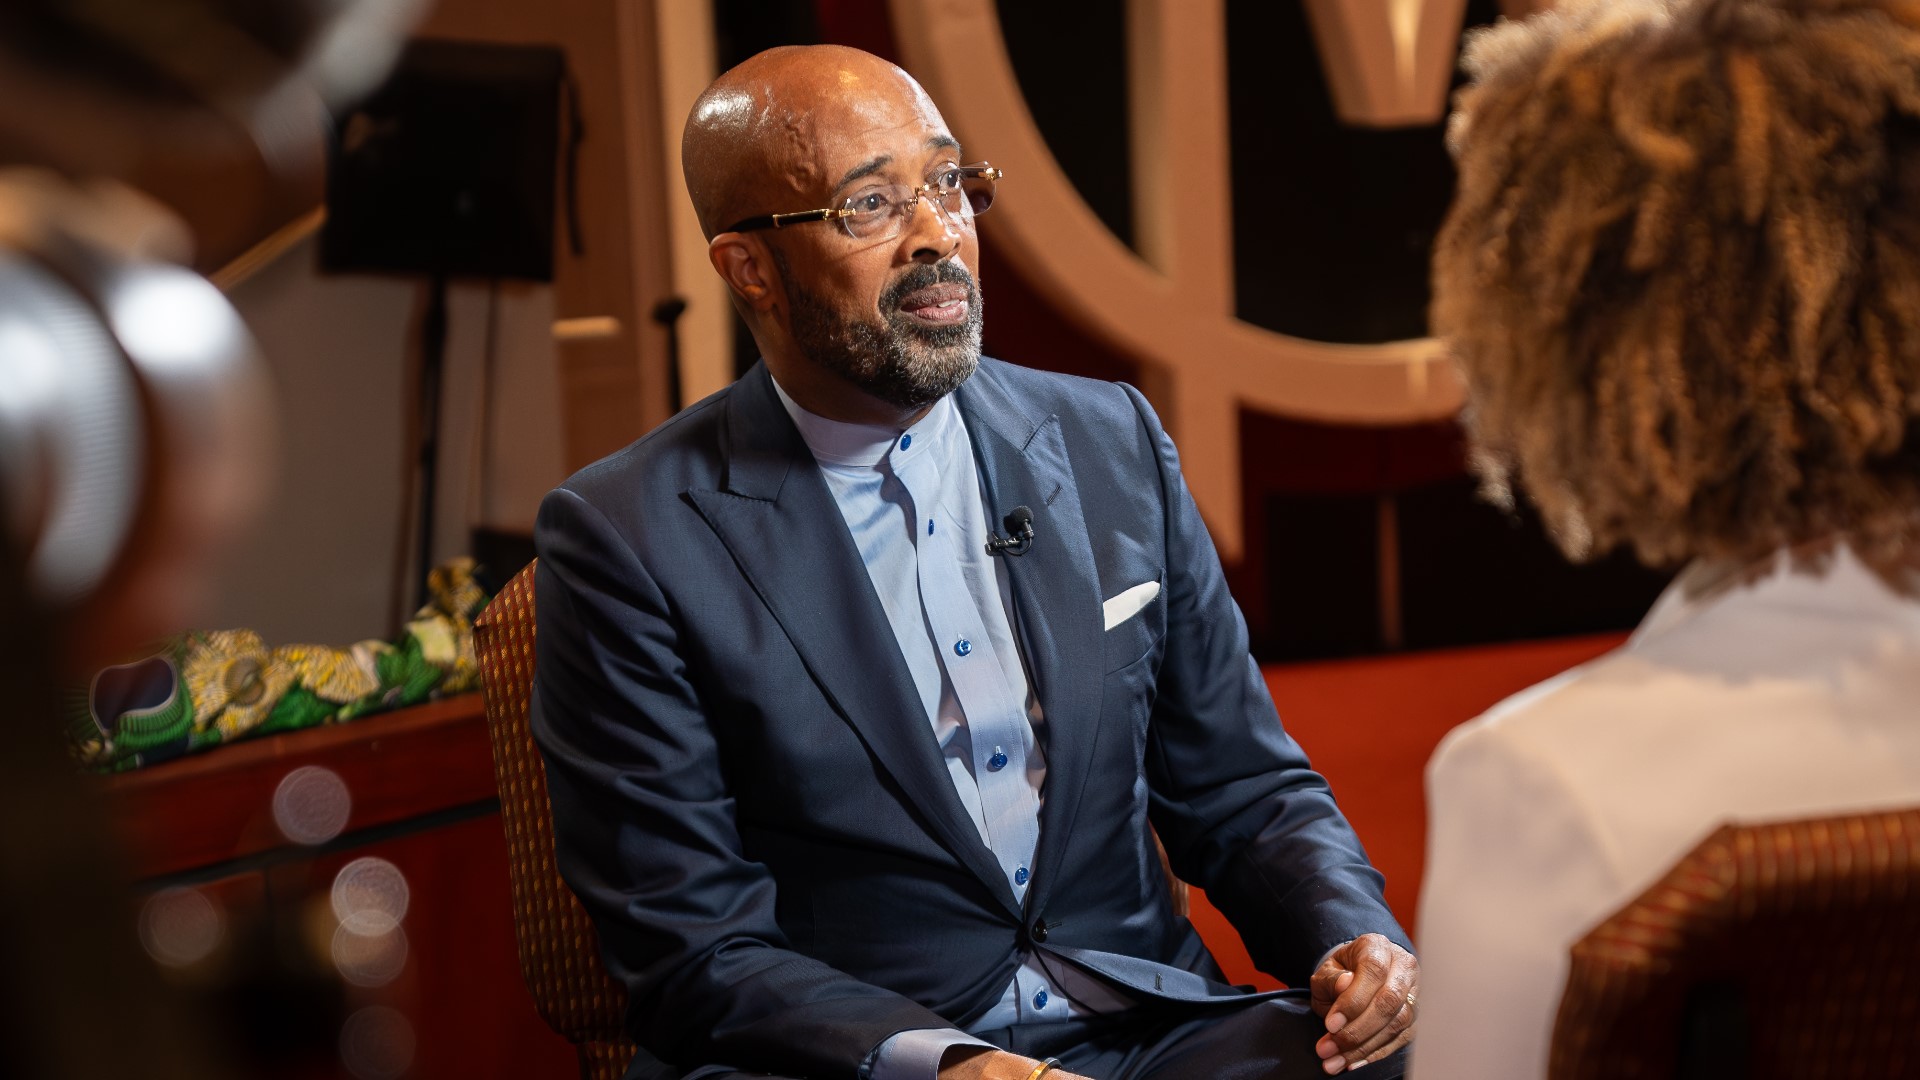 Rev. Haynes tells WFAA that he knew he would be a leader and activist since he was young, but he never expected the phone call from Rev. Jesse Jackson.